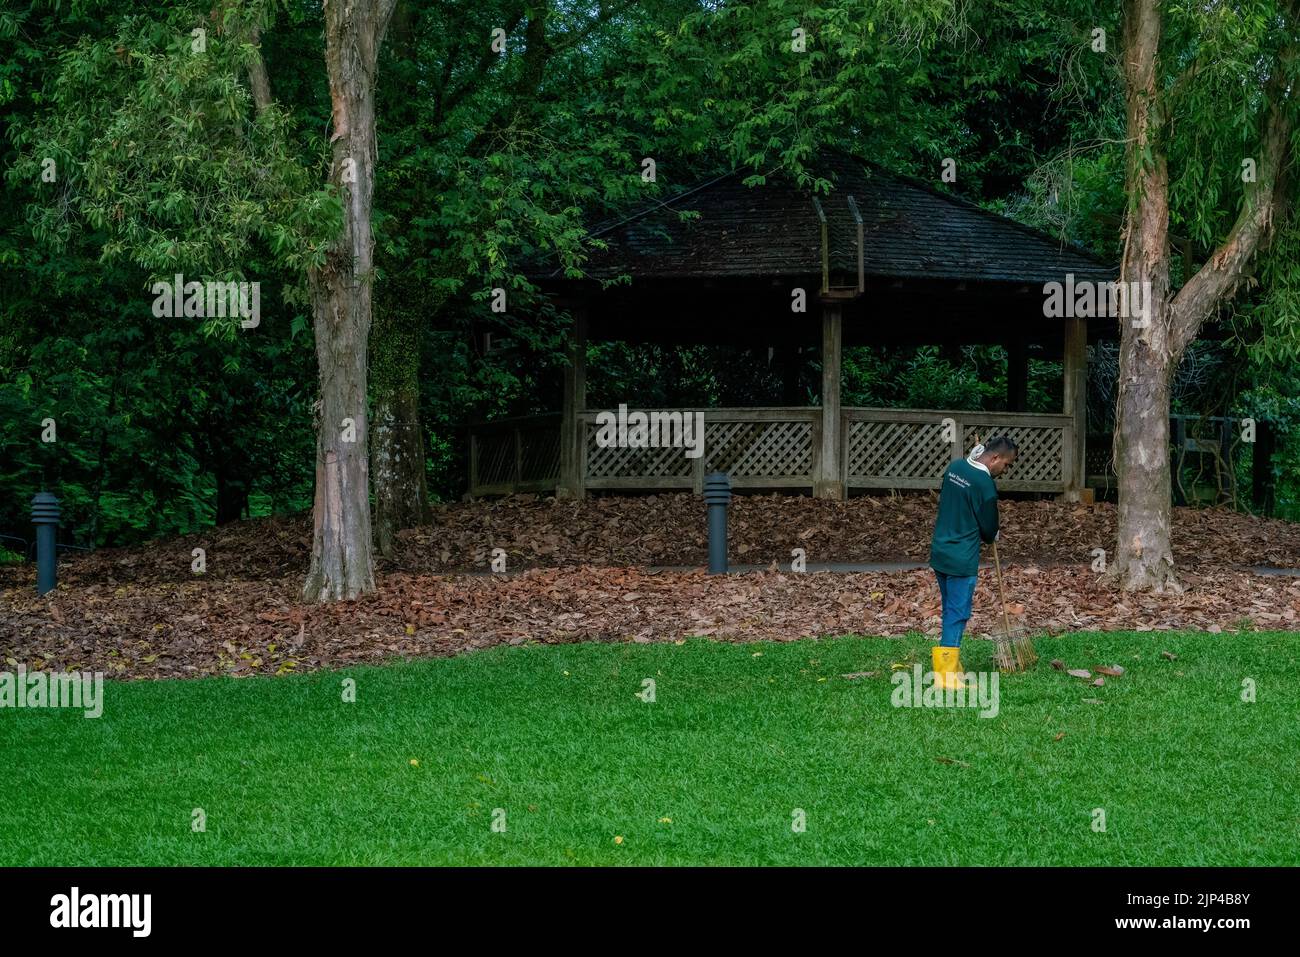 A gardener is sweeping up leaves with a broom at Botanic Gardens, Singapore. Stock Photo